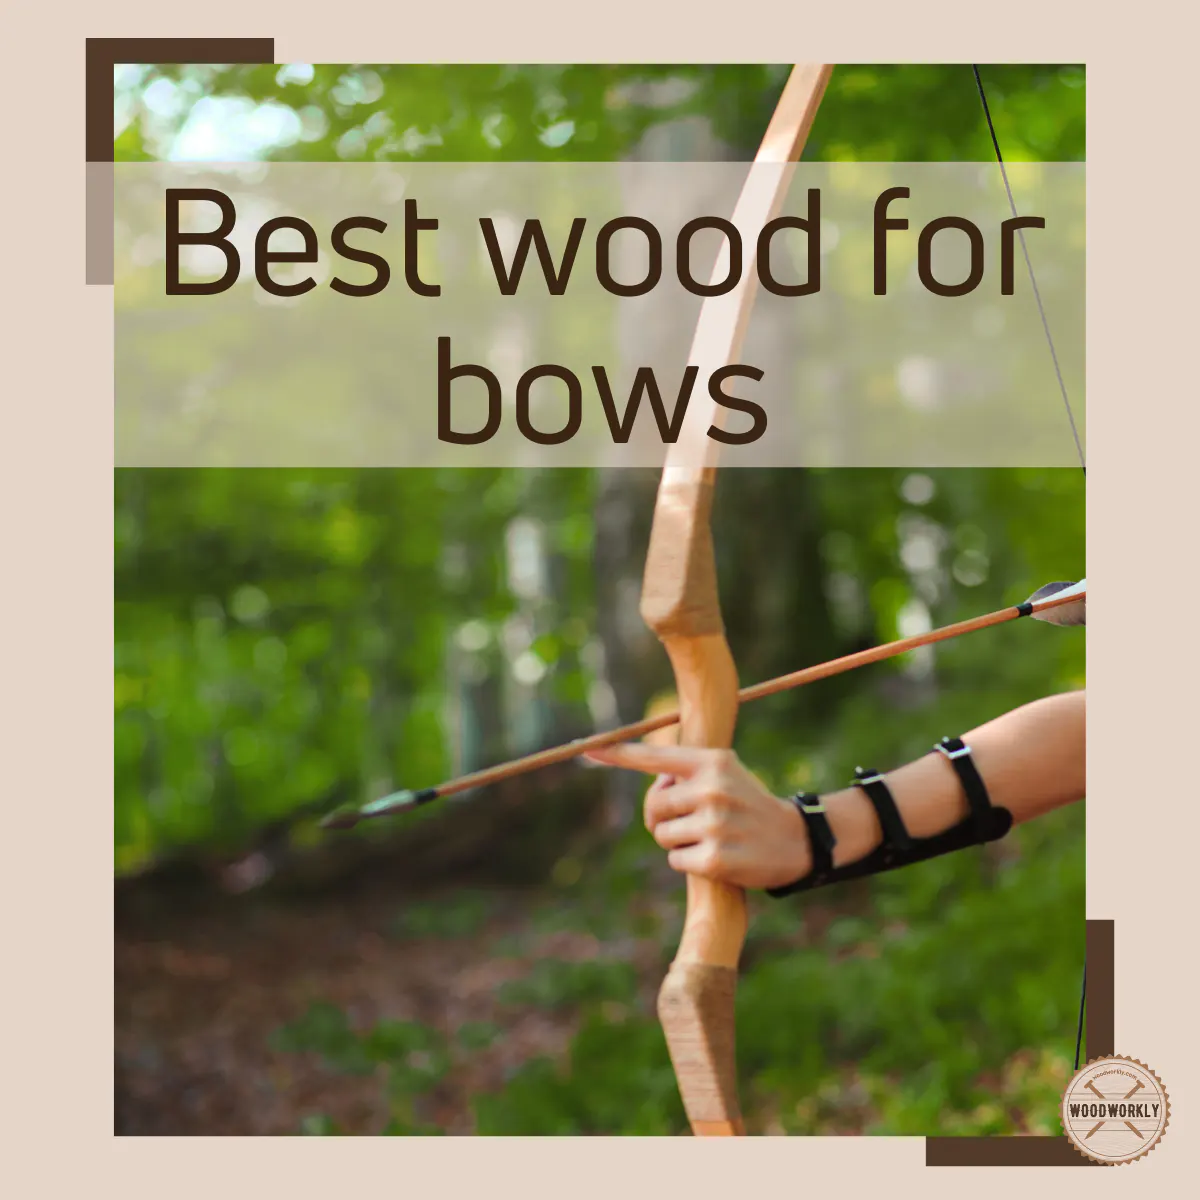 Best wood for bows